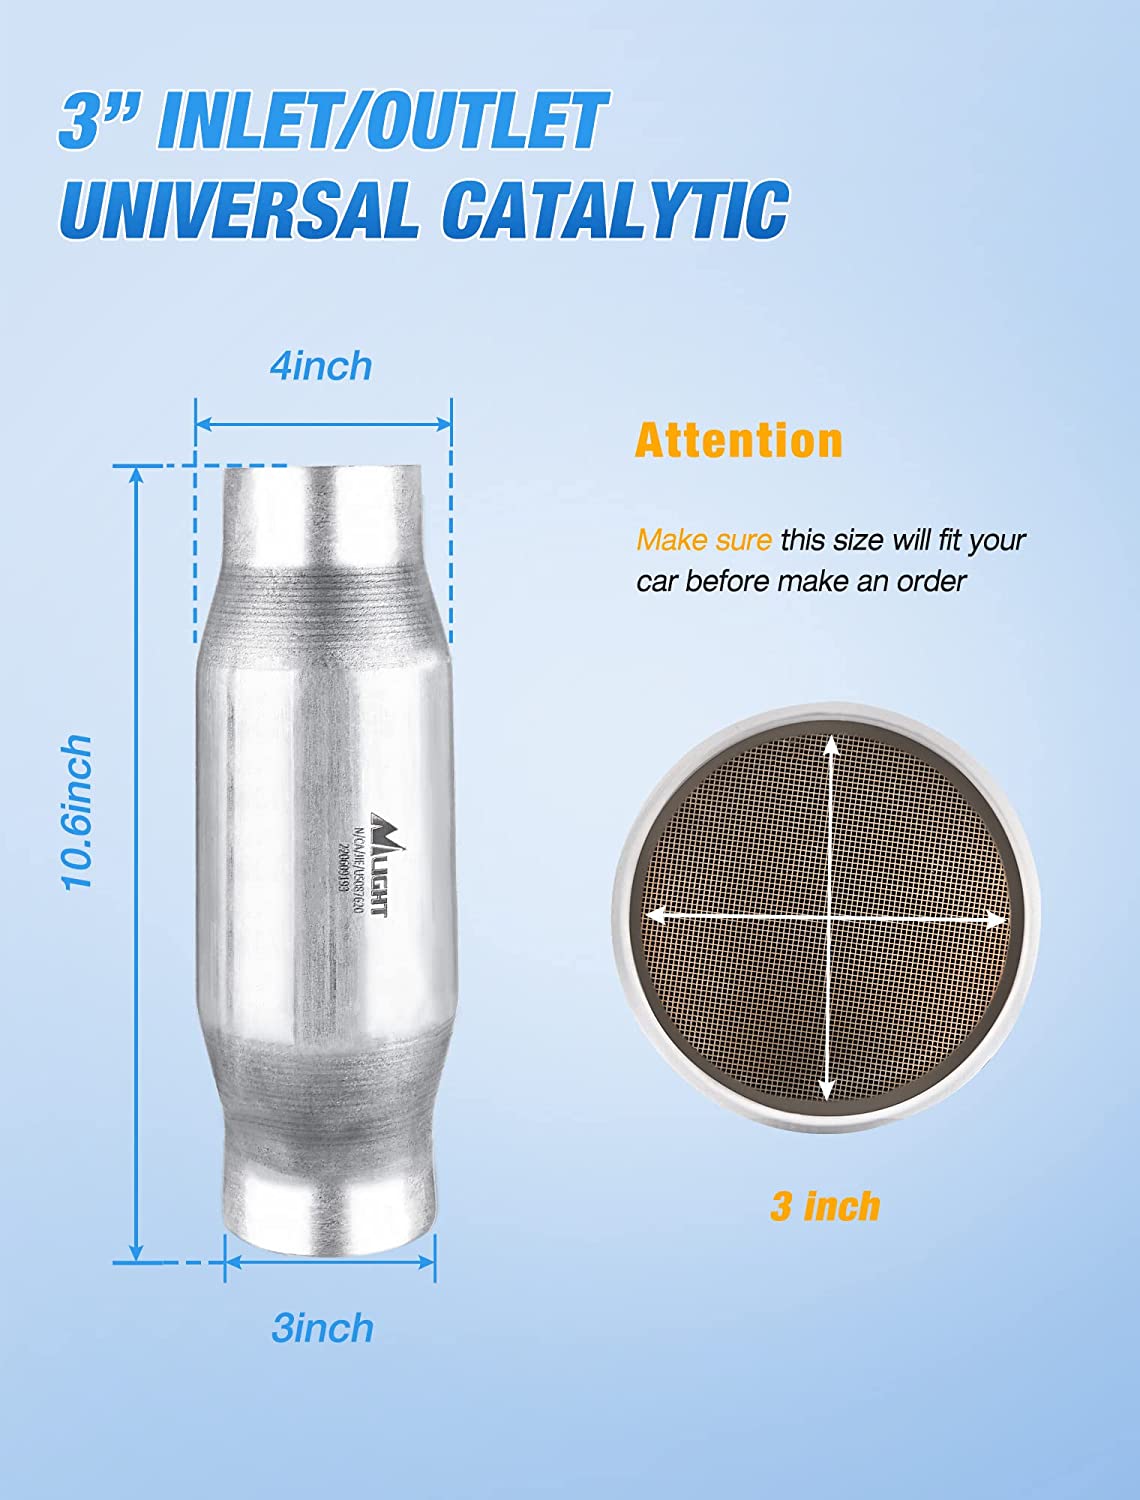 3" Inlet/Outlet Universal Catalytic Converter Nilight